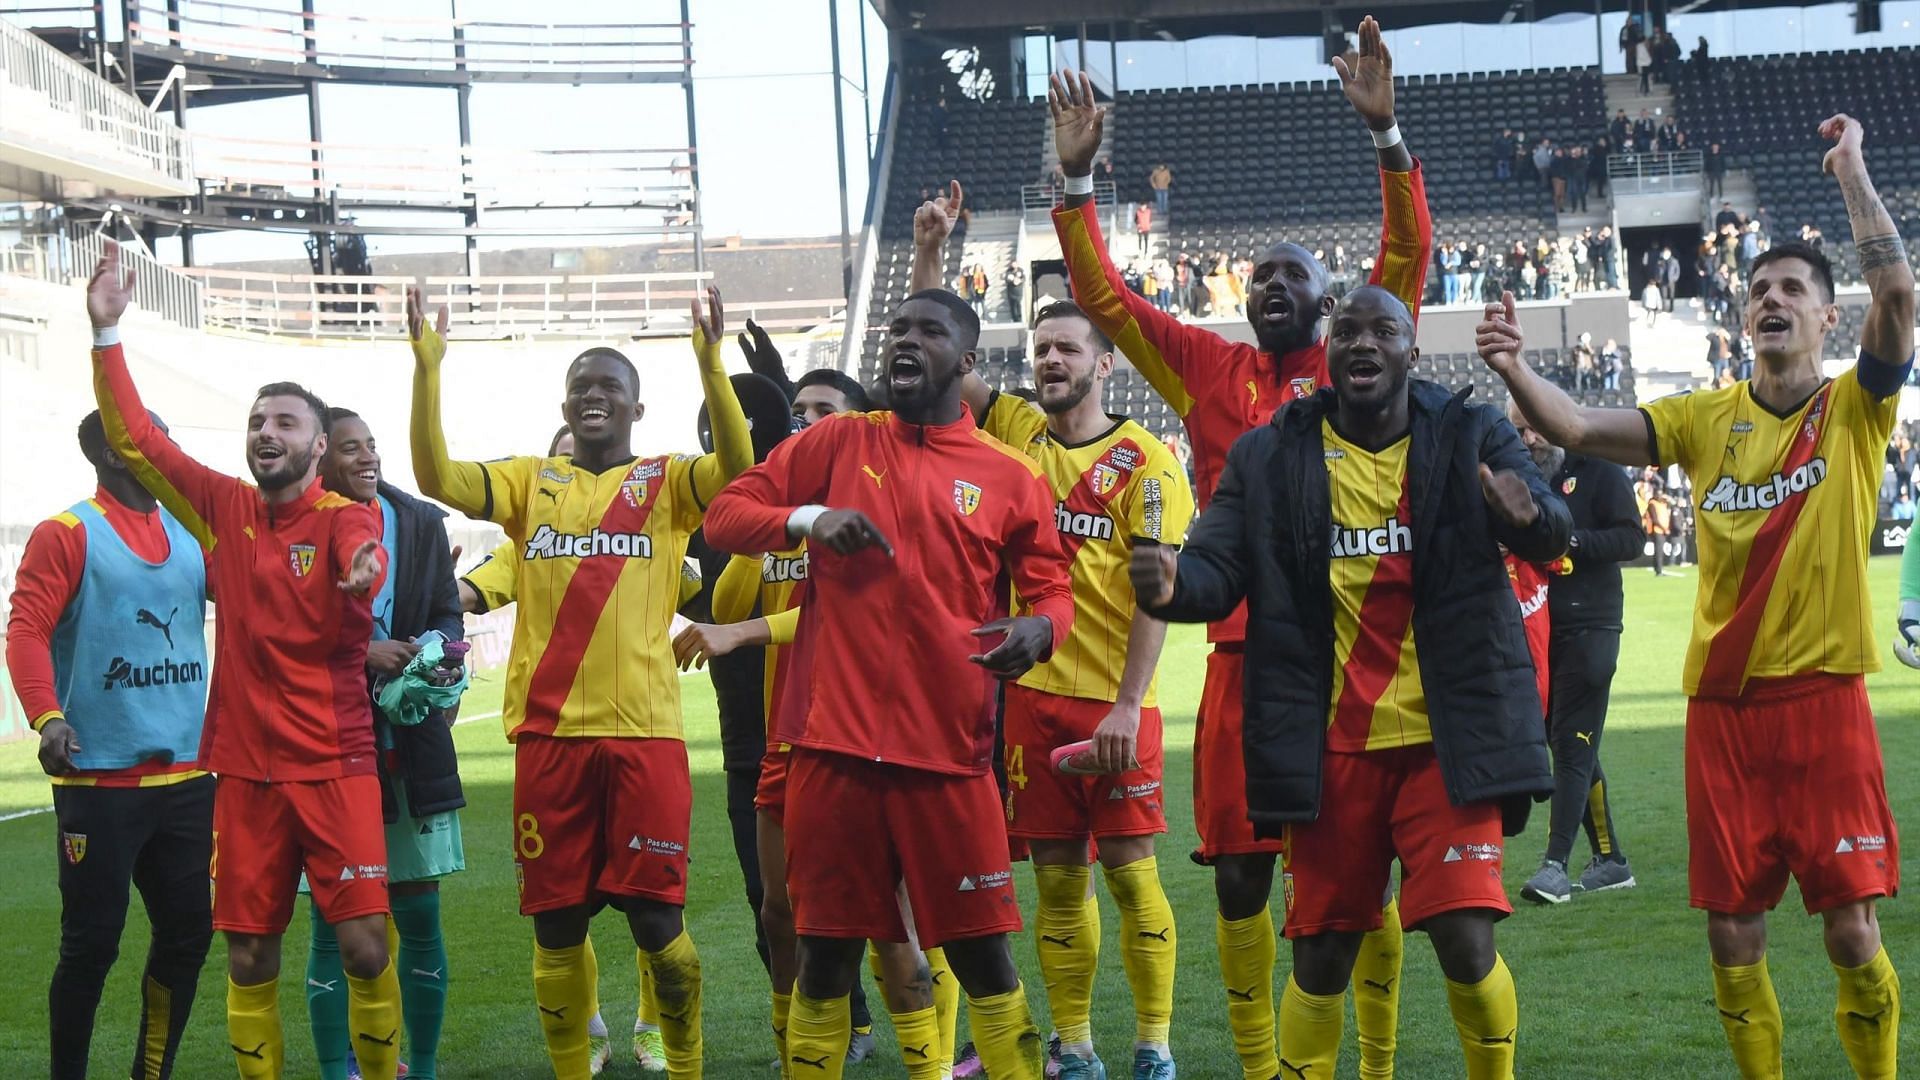 Lens will be hopeful of securing a win over struggling Metz this weekend